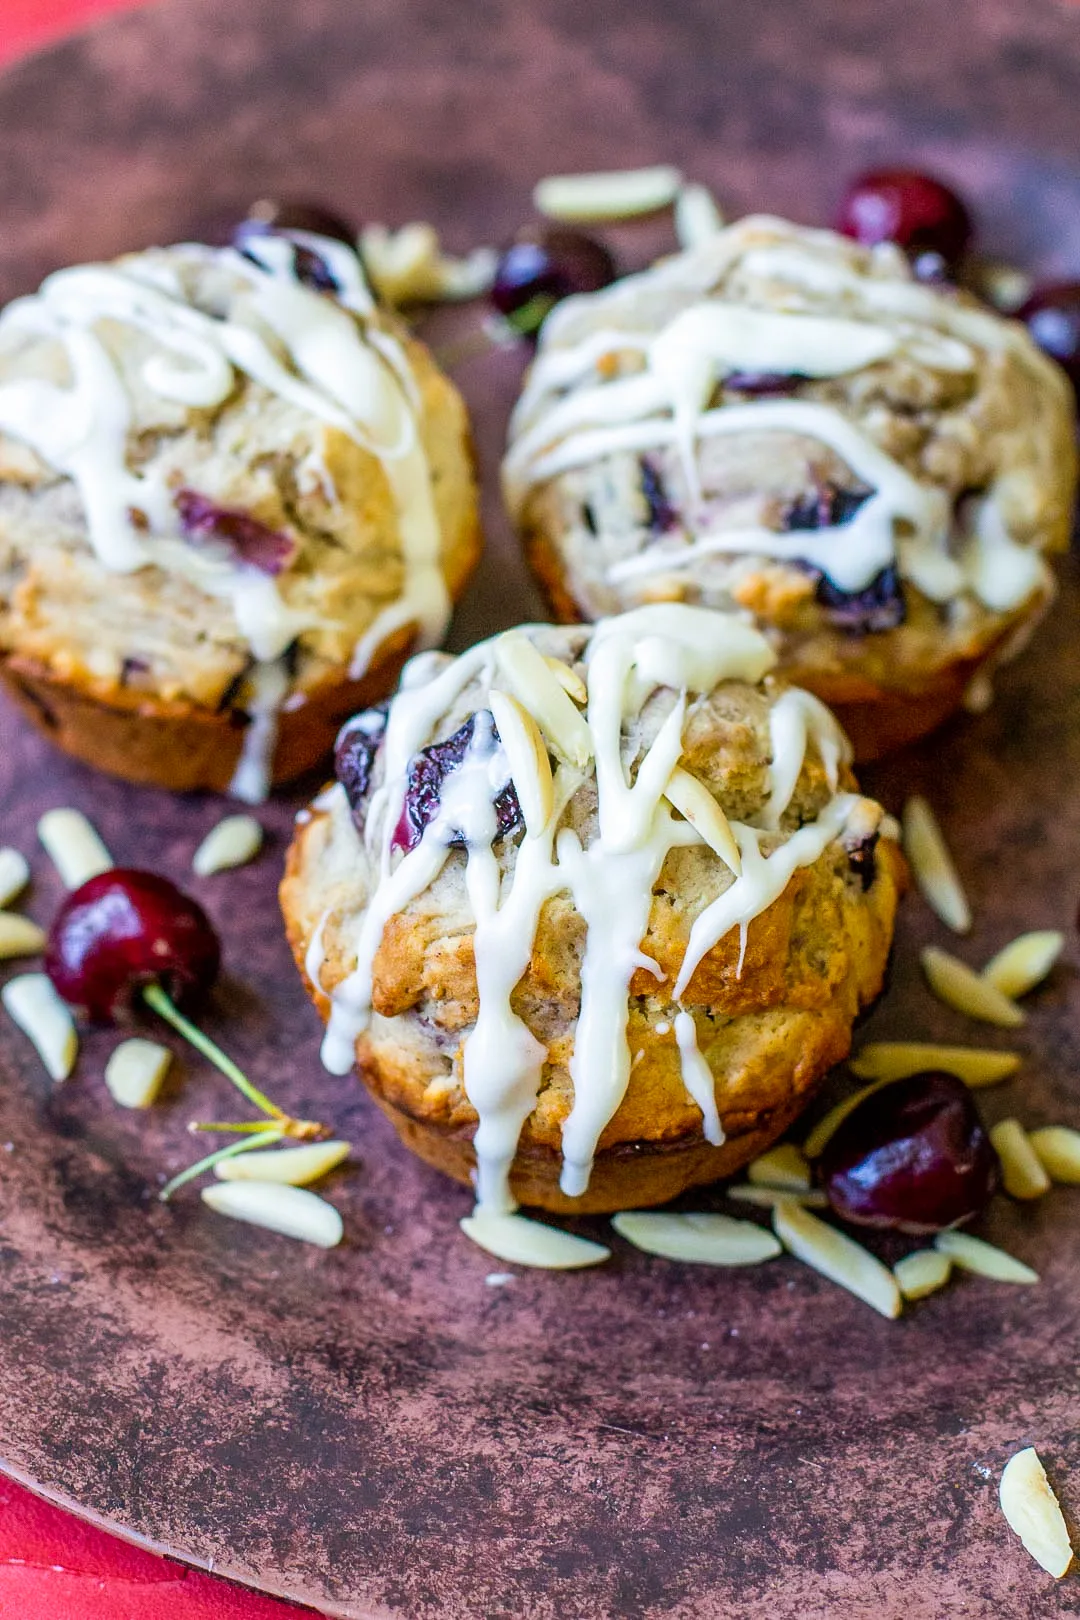 Easy and delicious cherry muffins made with fresh sweet cherries and a hint of almond.  Cherries are a wonderful addition to a basic muffin batter.